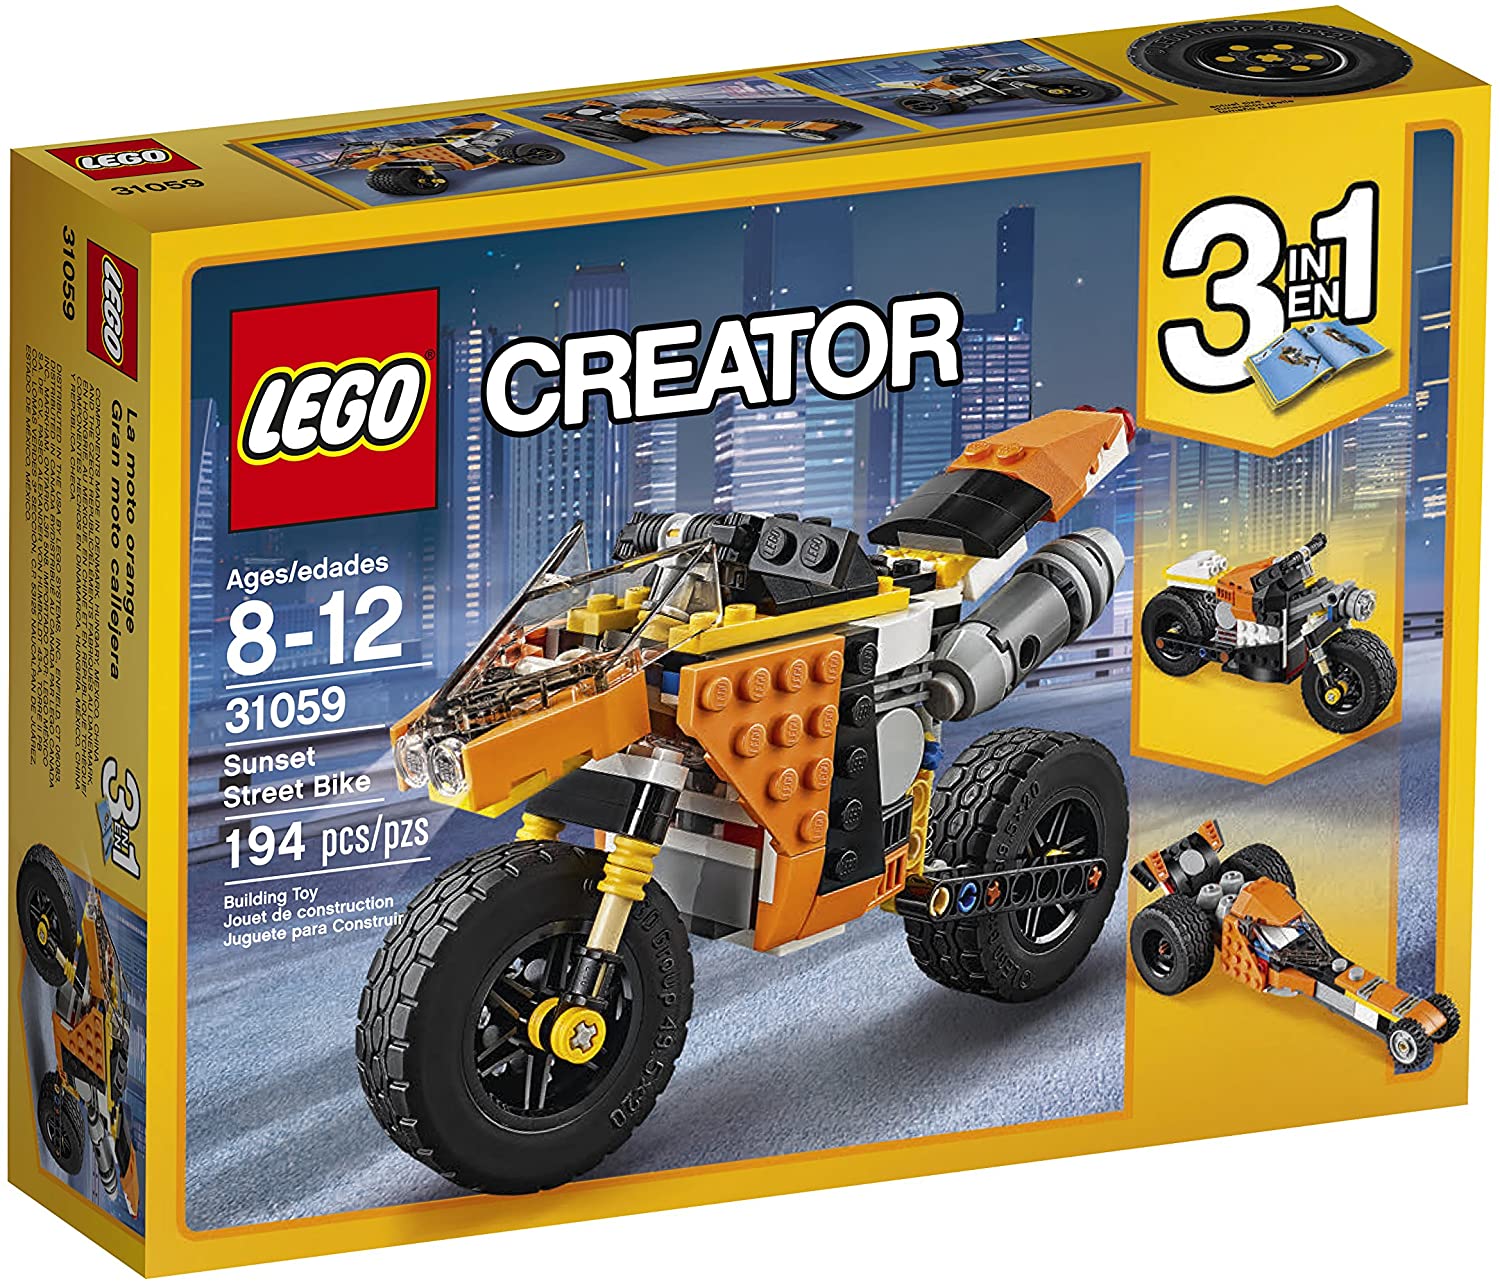 7 Best LEGO Motorcycle Sets 2022 - Buying Guide & Reviews 7